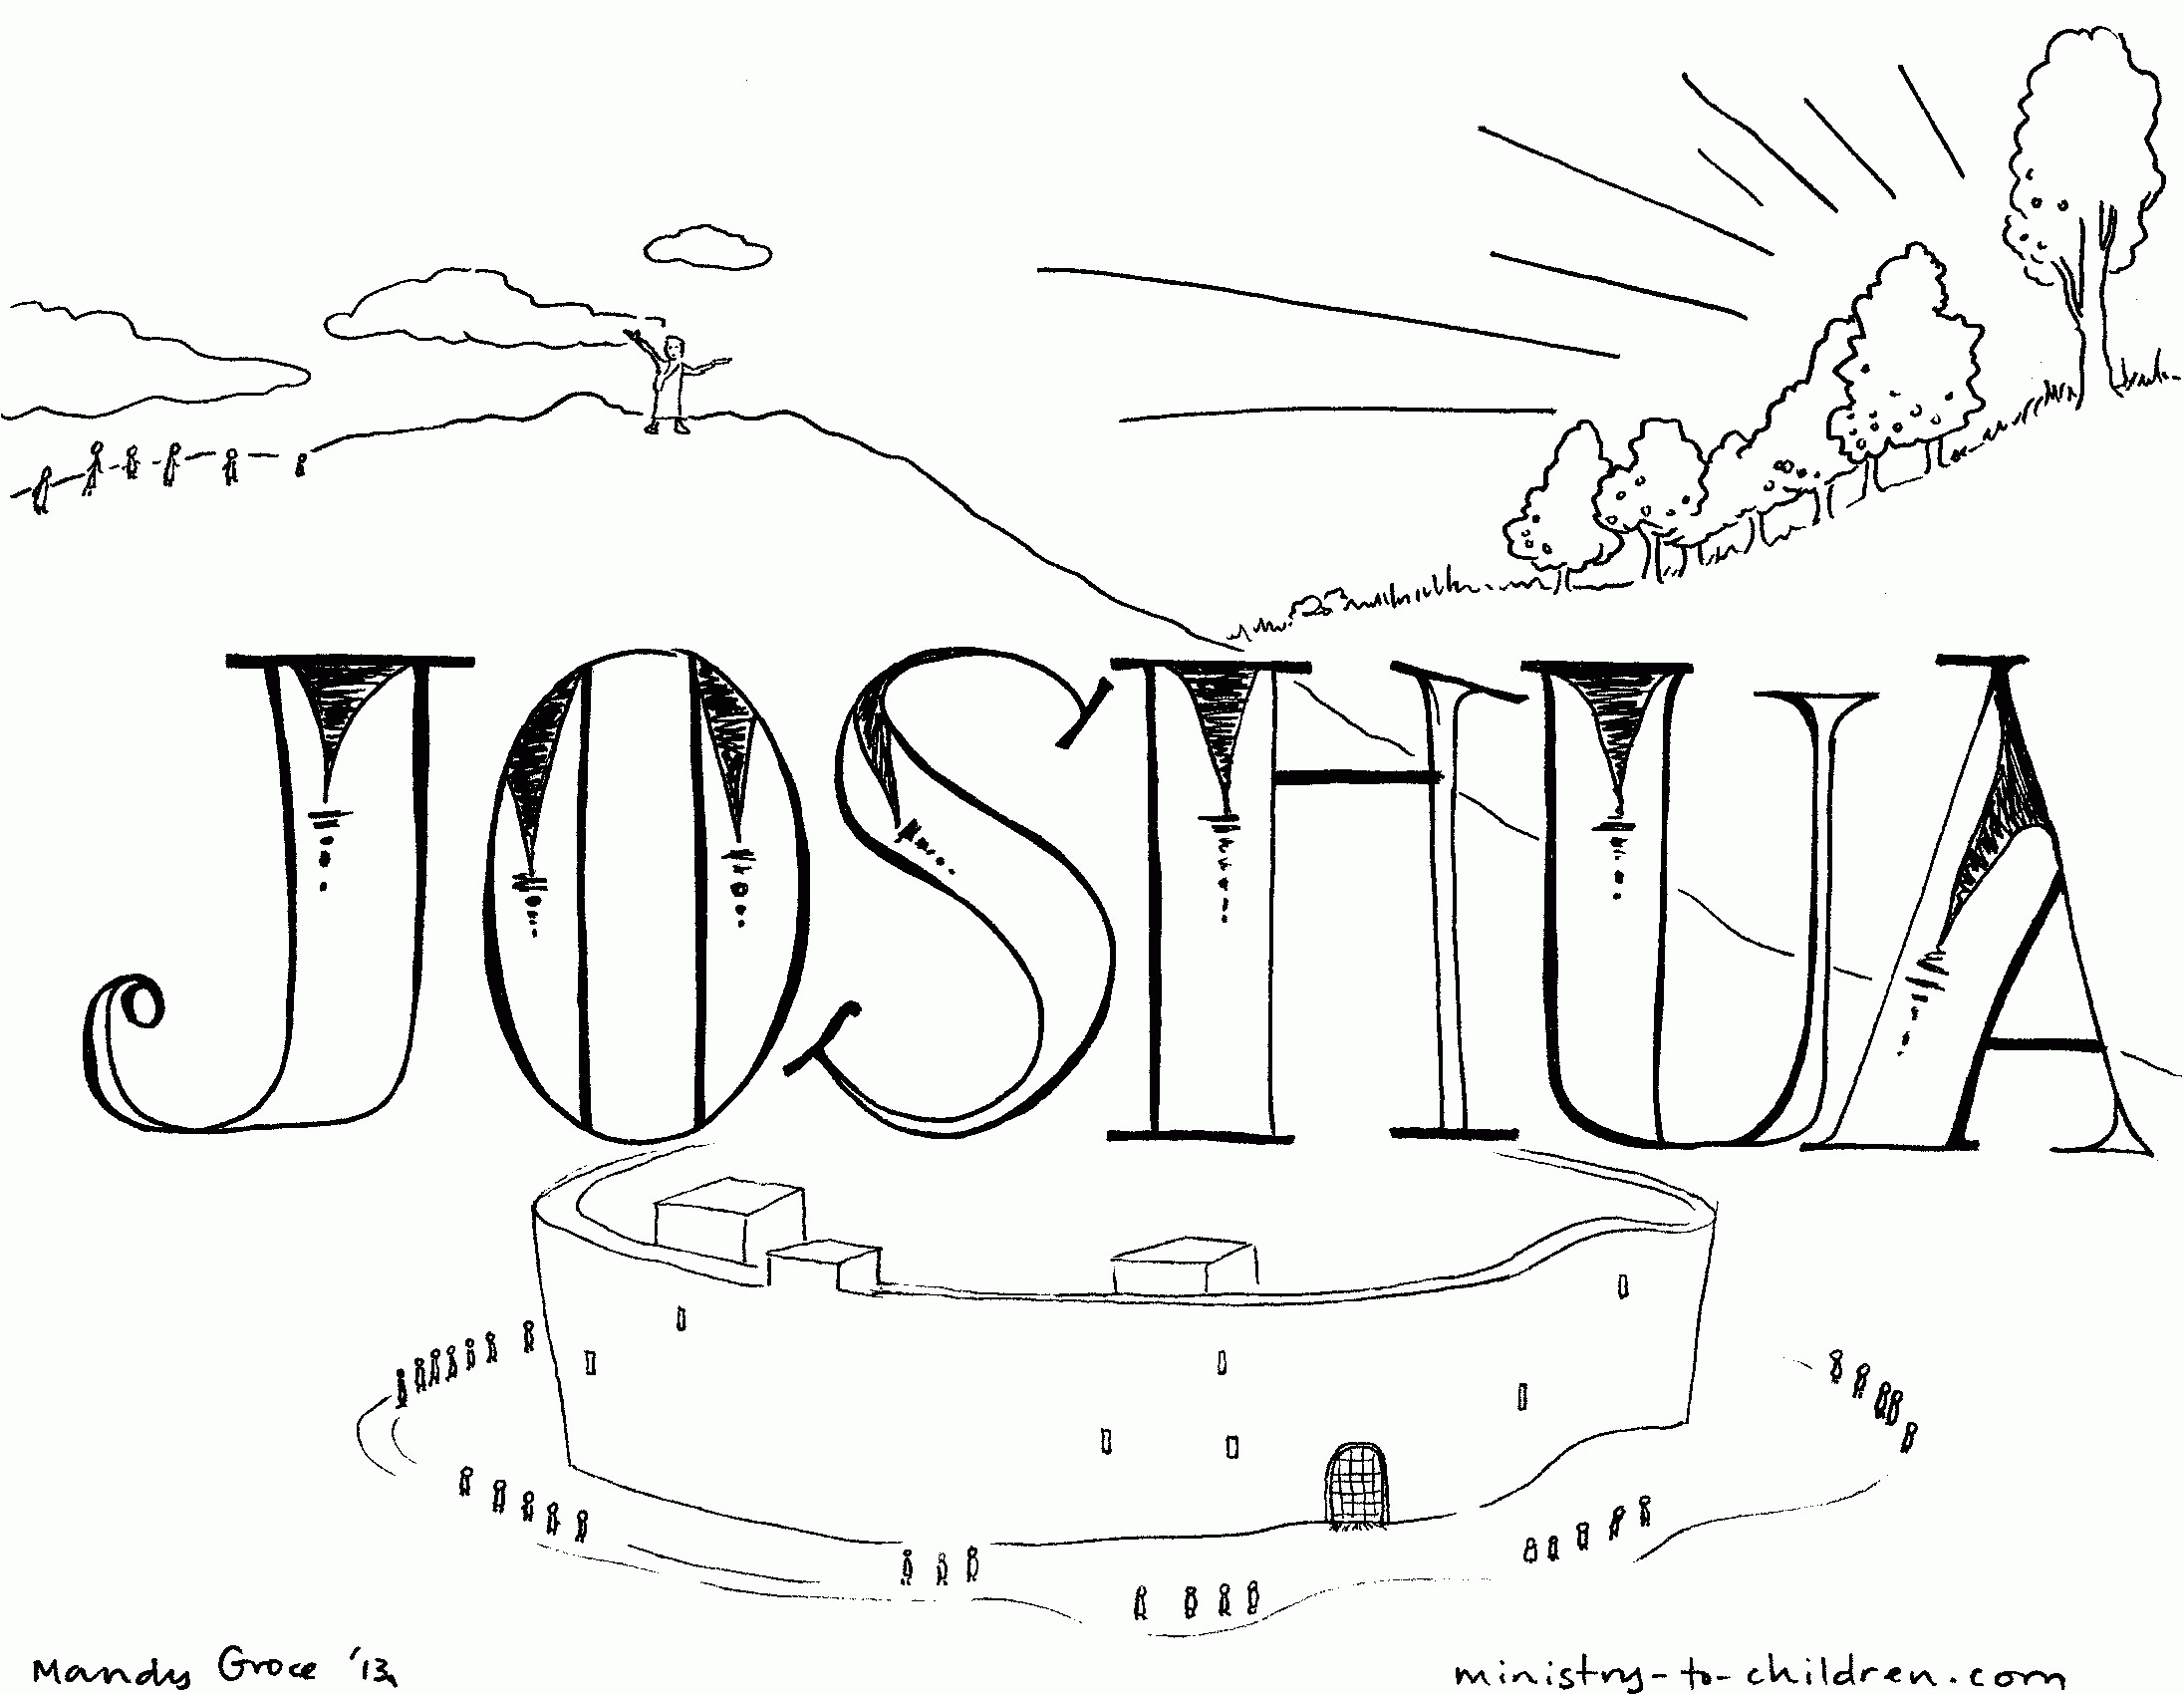 Book of Joshua" Bible Coloring Page for Children